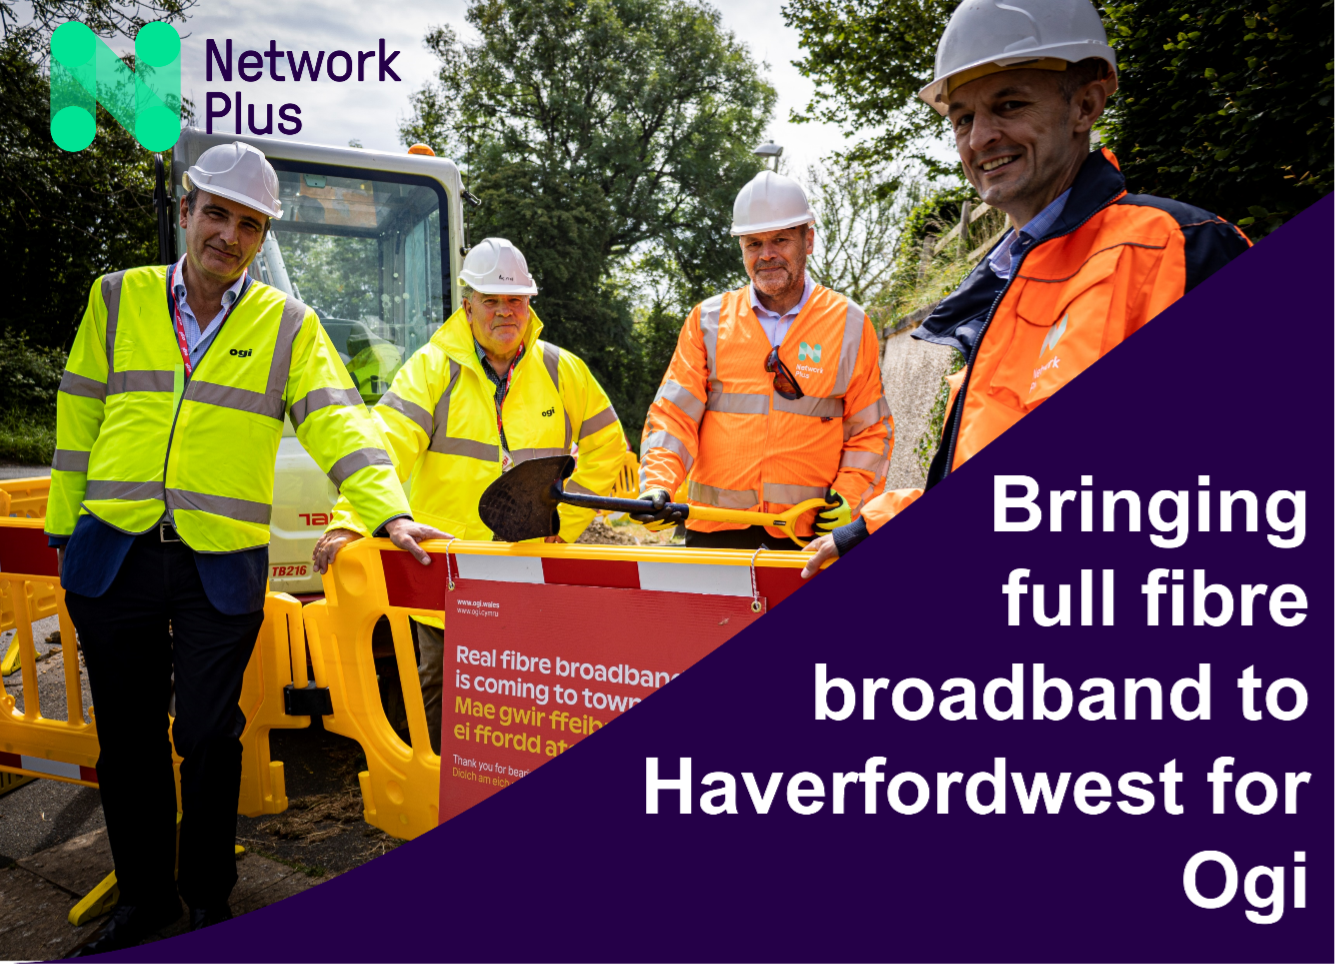 Network Plus is working with Ogi to deliver full fibre broadband to Haverfordwest